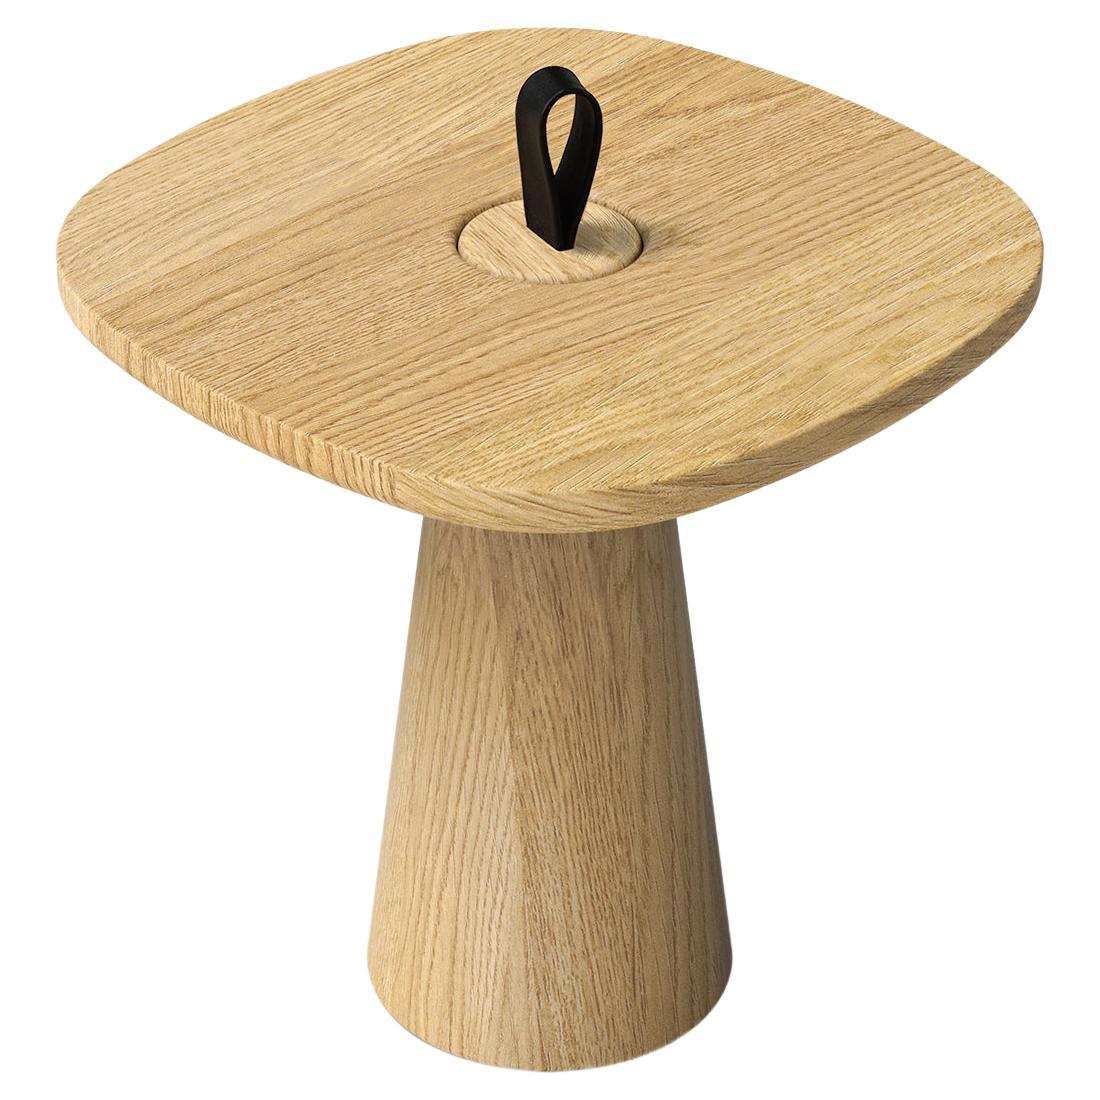 Minimalist Modern Side Table in Natural Oak and Leather Strap For Sale